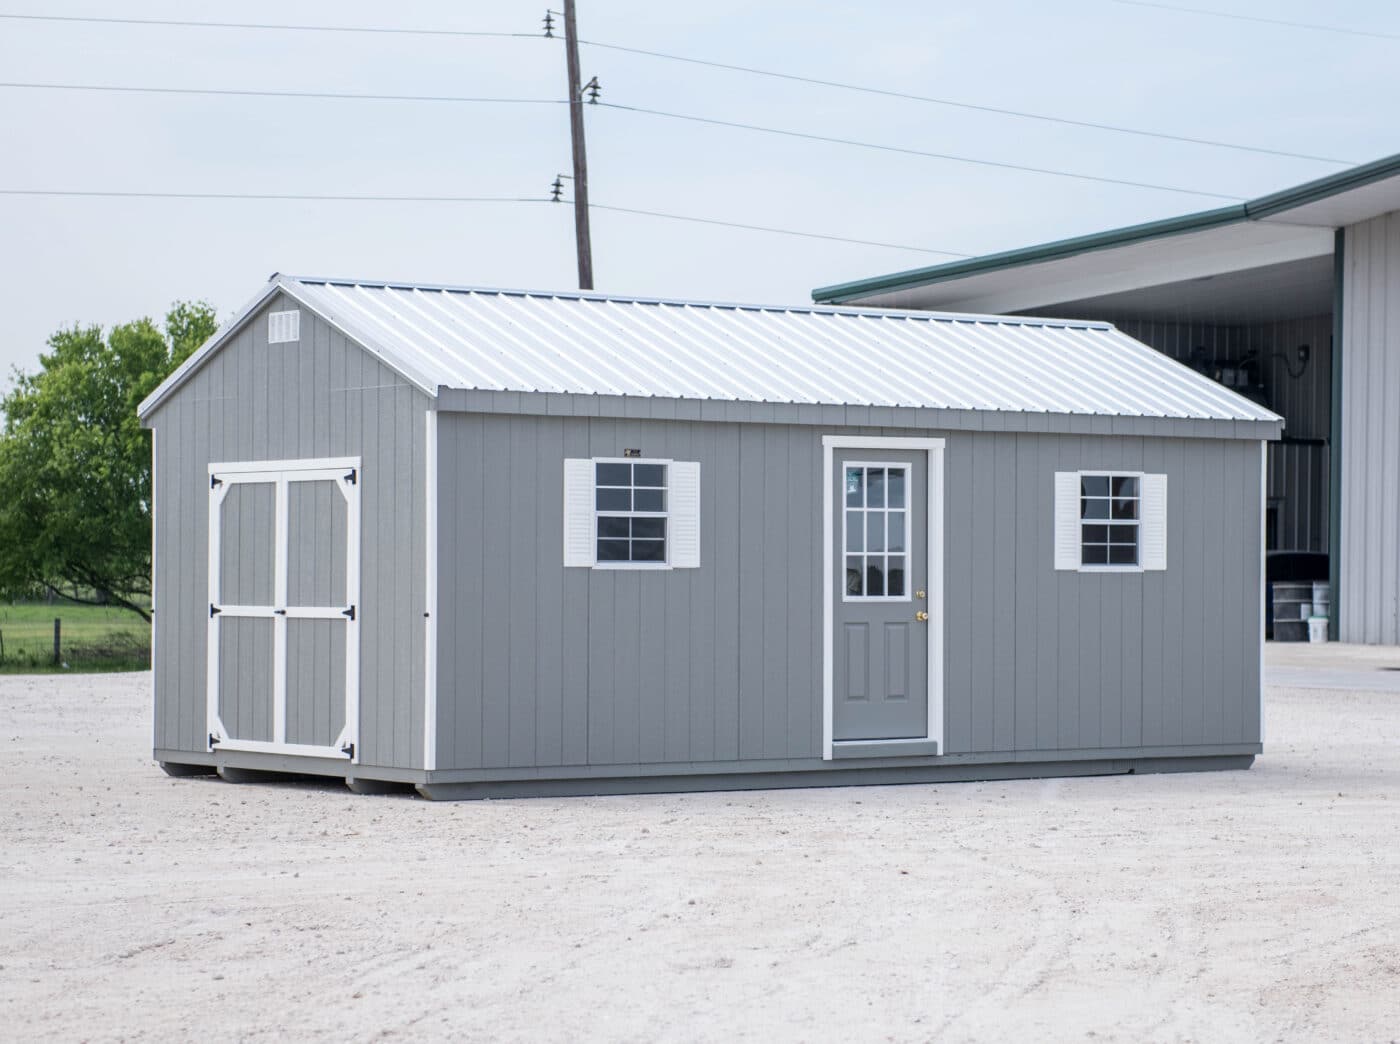 custom sheds for sale near college station texas